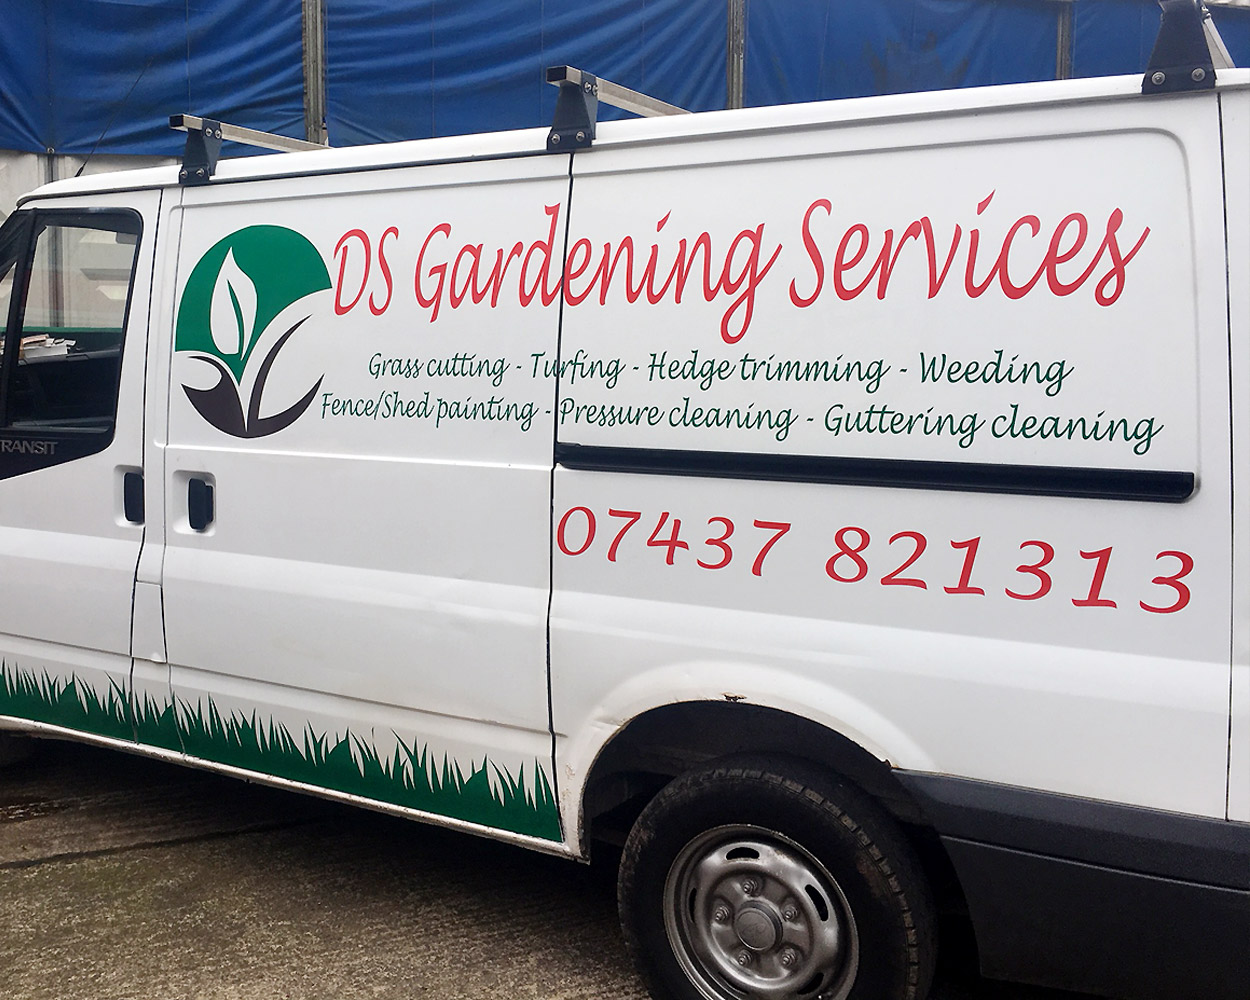 DS Gardening Services Vehicle Livery